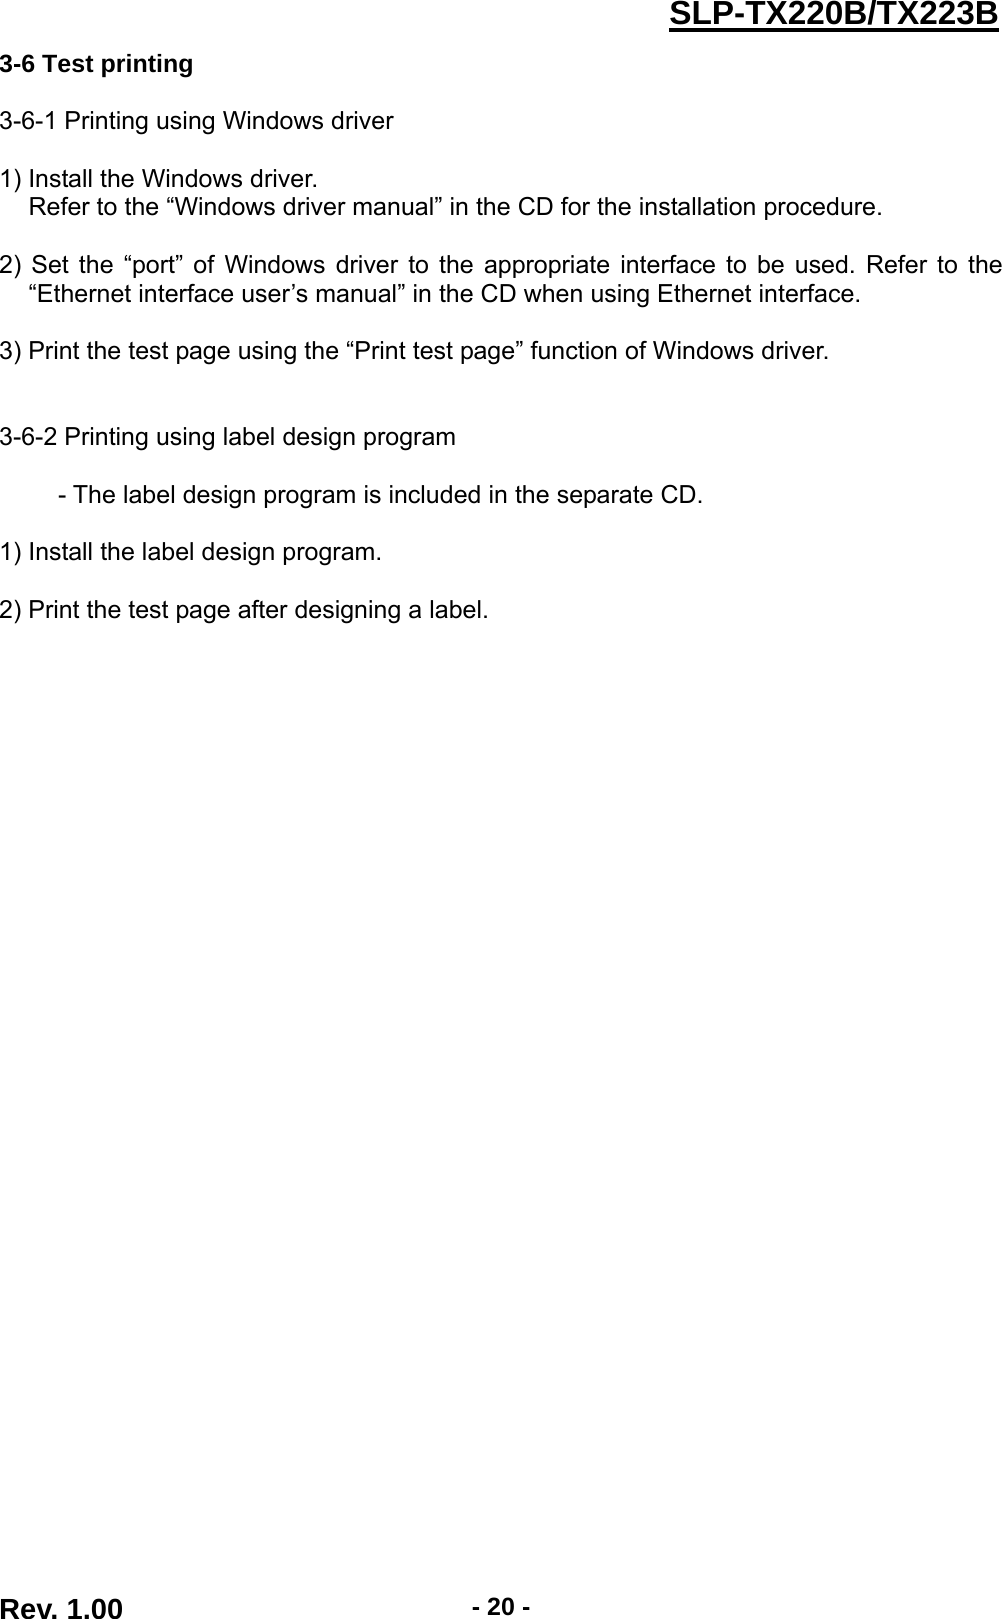  Rev. 1.00  - 20 -SLP-TX220B/TX223B3-6 Test printing  3-6-1 Printing using Windows driver  1) Install the Windows driver. Refer to the “Windows driver manual” in the CD for the installation procedure.  2) Set the “port” of Windows driver to the appropriate interface to be used. Refer to the “Ethernet interface user’s manual” in the CD when using Ethernet interface.  3) Print the test page using the “Print test page” function of Windows driver.   3-6-2 Printing using label design program  - The label design program is included in the separate CD.  1) Install the label design program.  2) Print the test page after designing a label. 